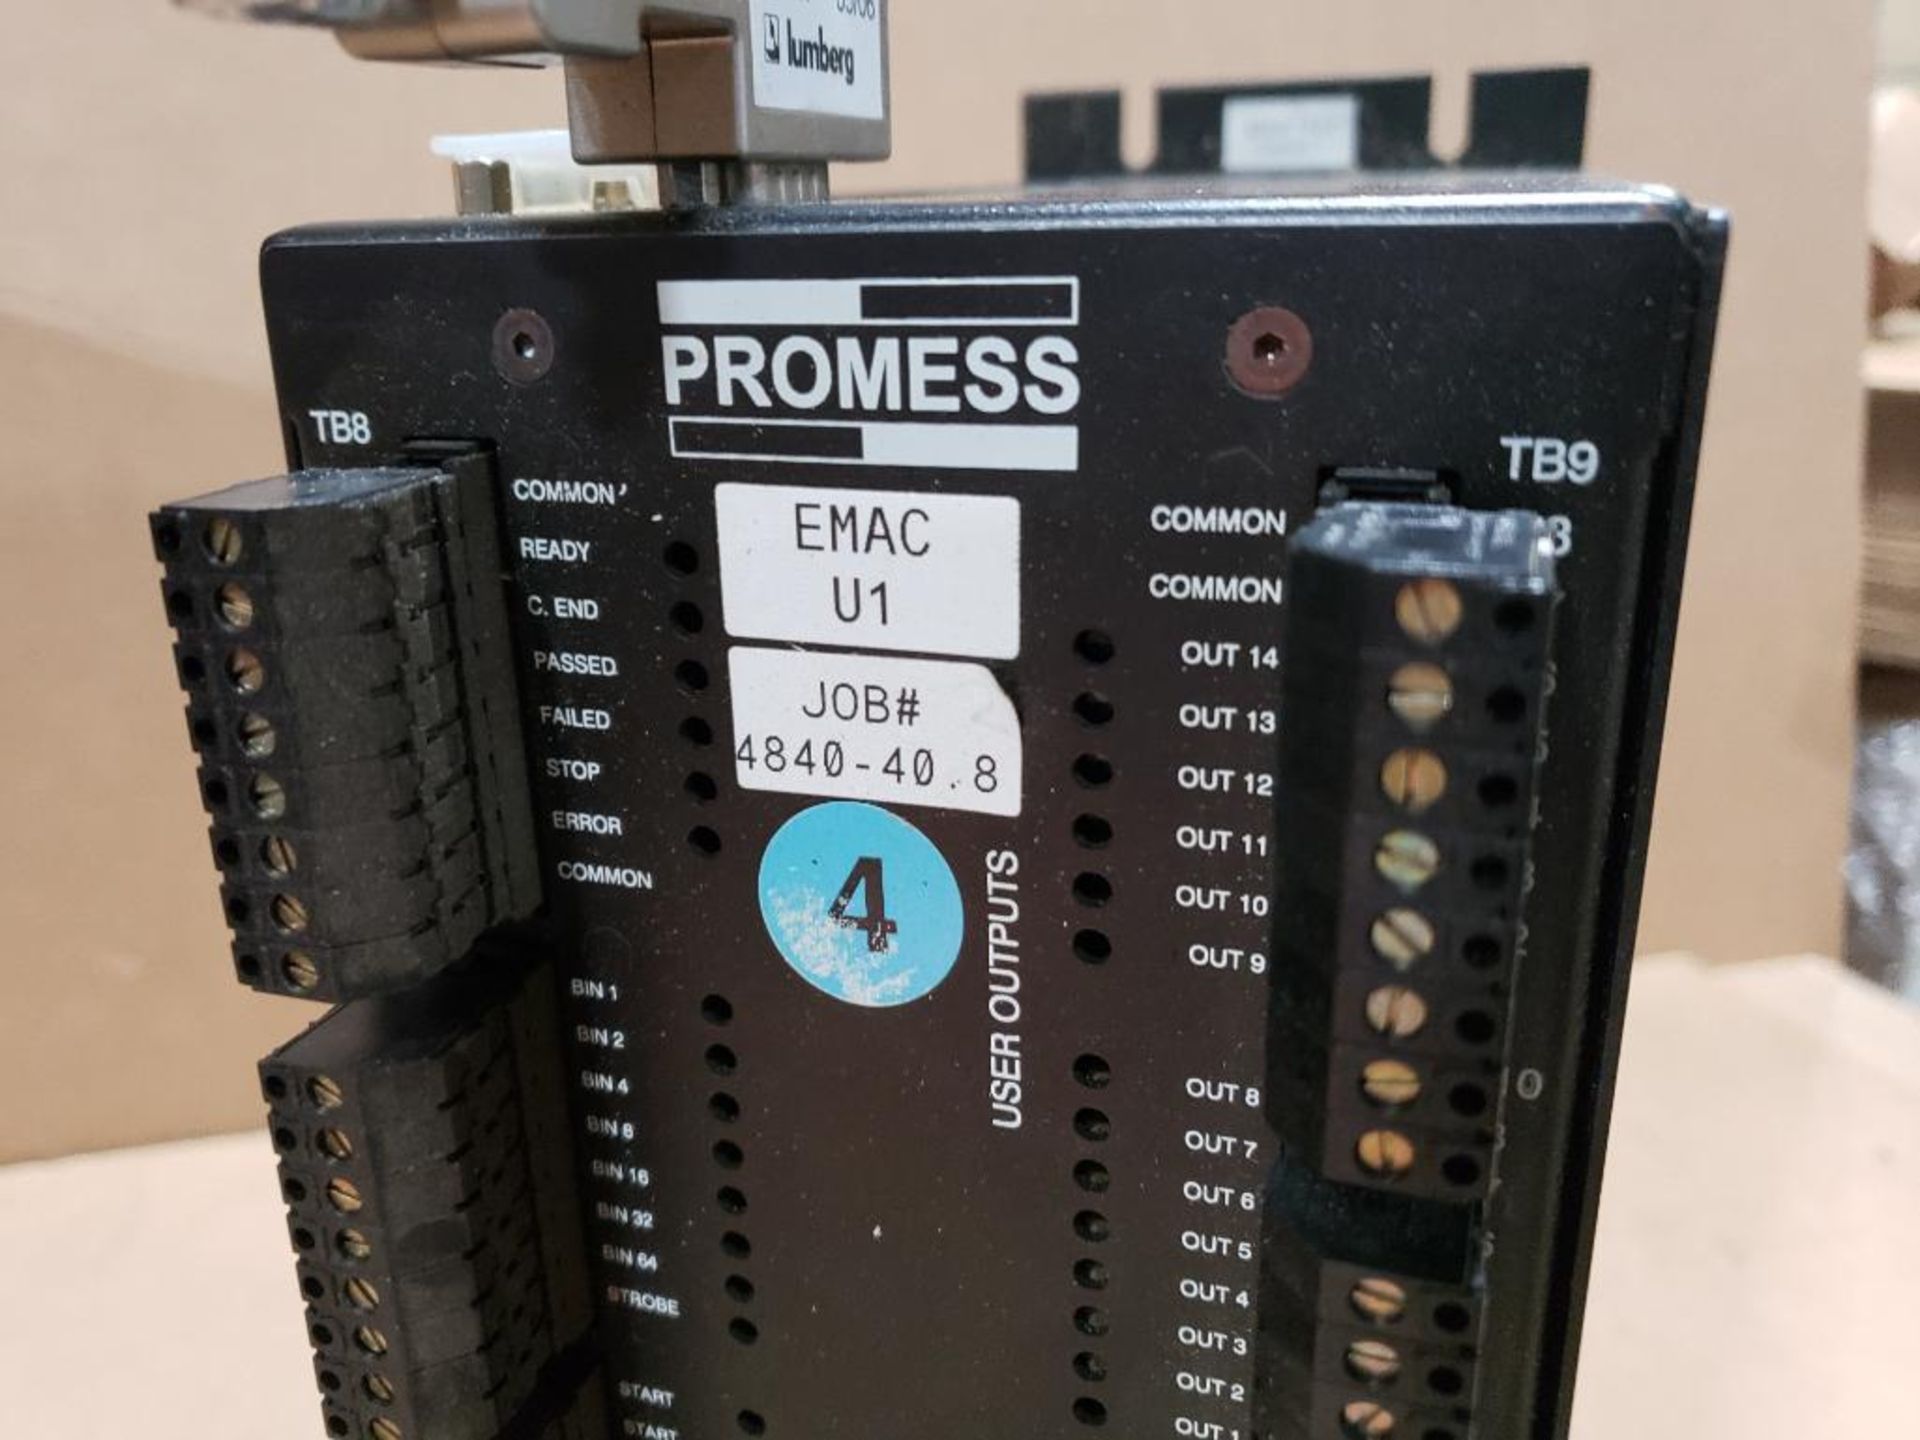 Promess drive. EMAC controller. 1-2 Axis. V2.1. Part number 1906901486 V2.1. - Image 5 of 5